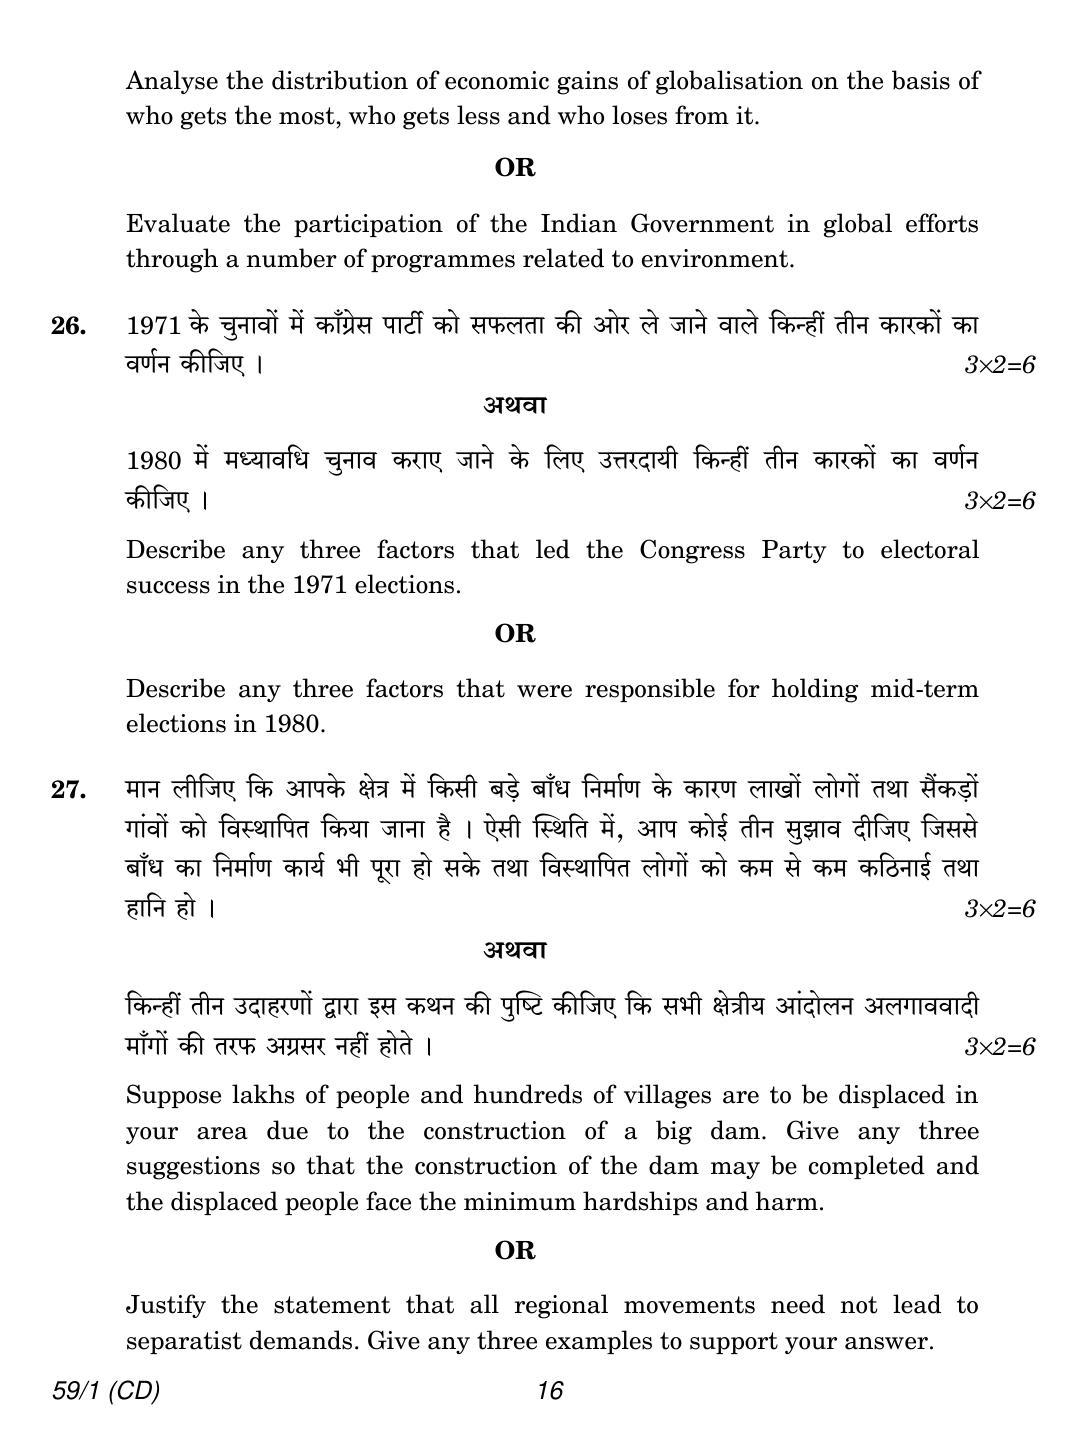 CBSE Class 12 59-1 POLITICAL SCIENCE CD 2018 Question Paper - Page 16